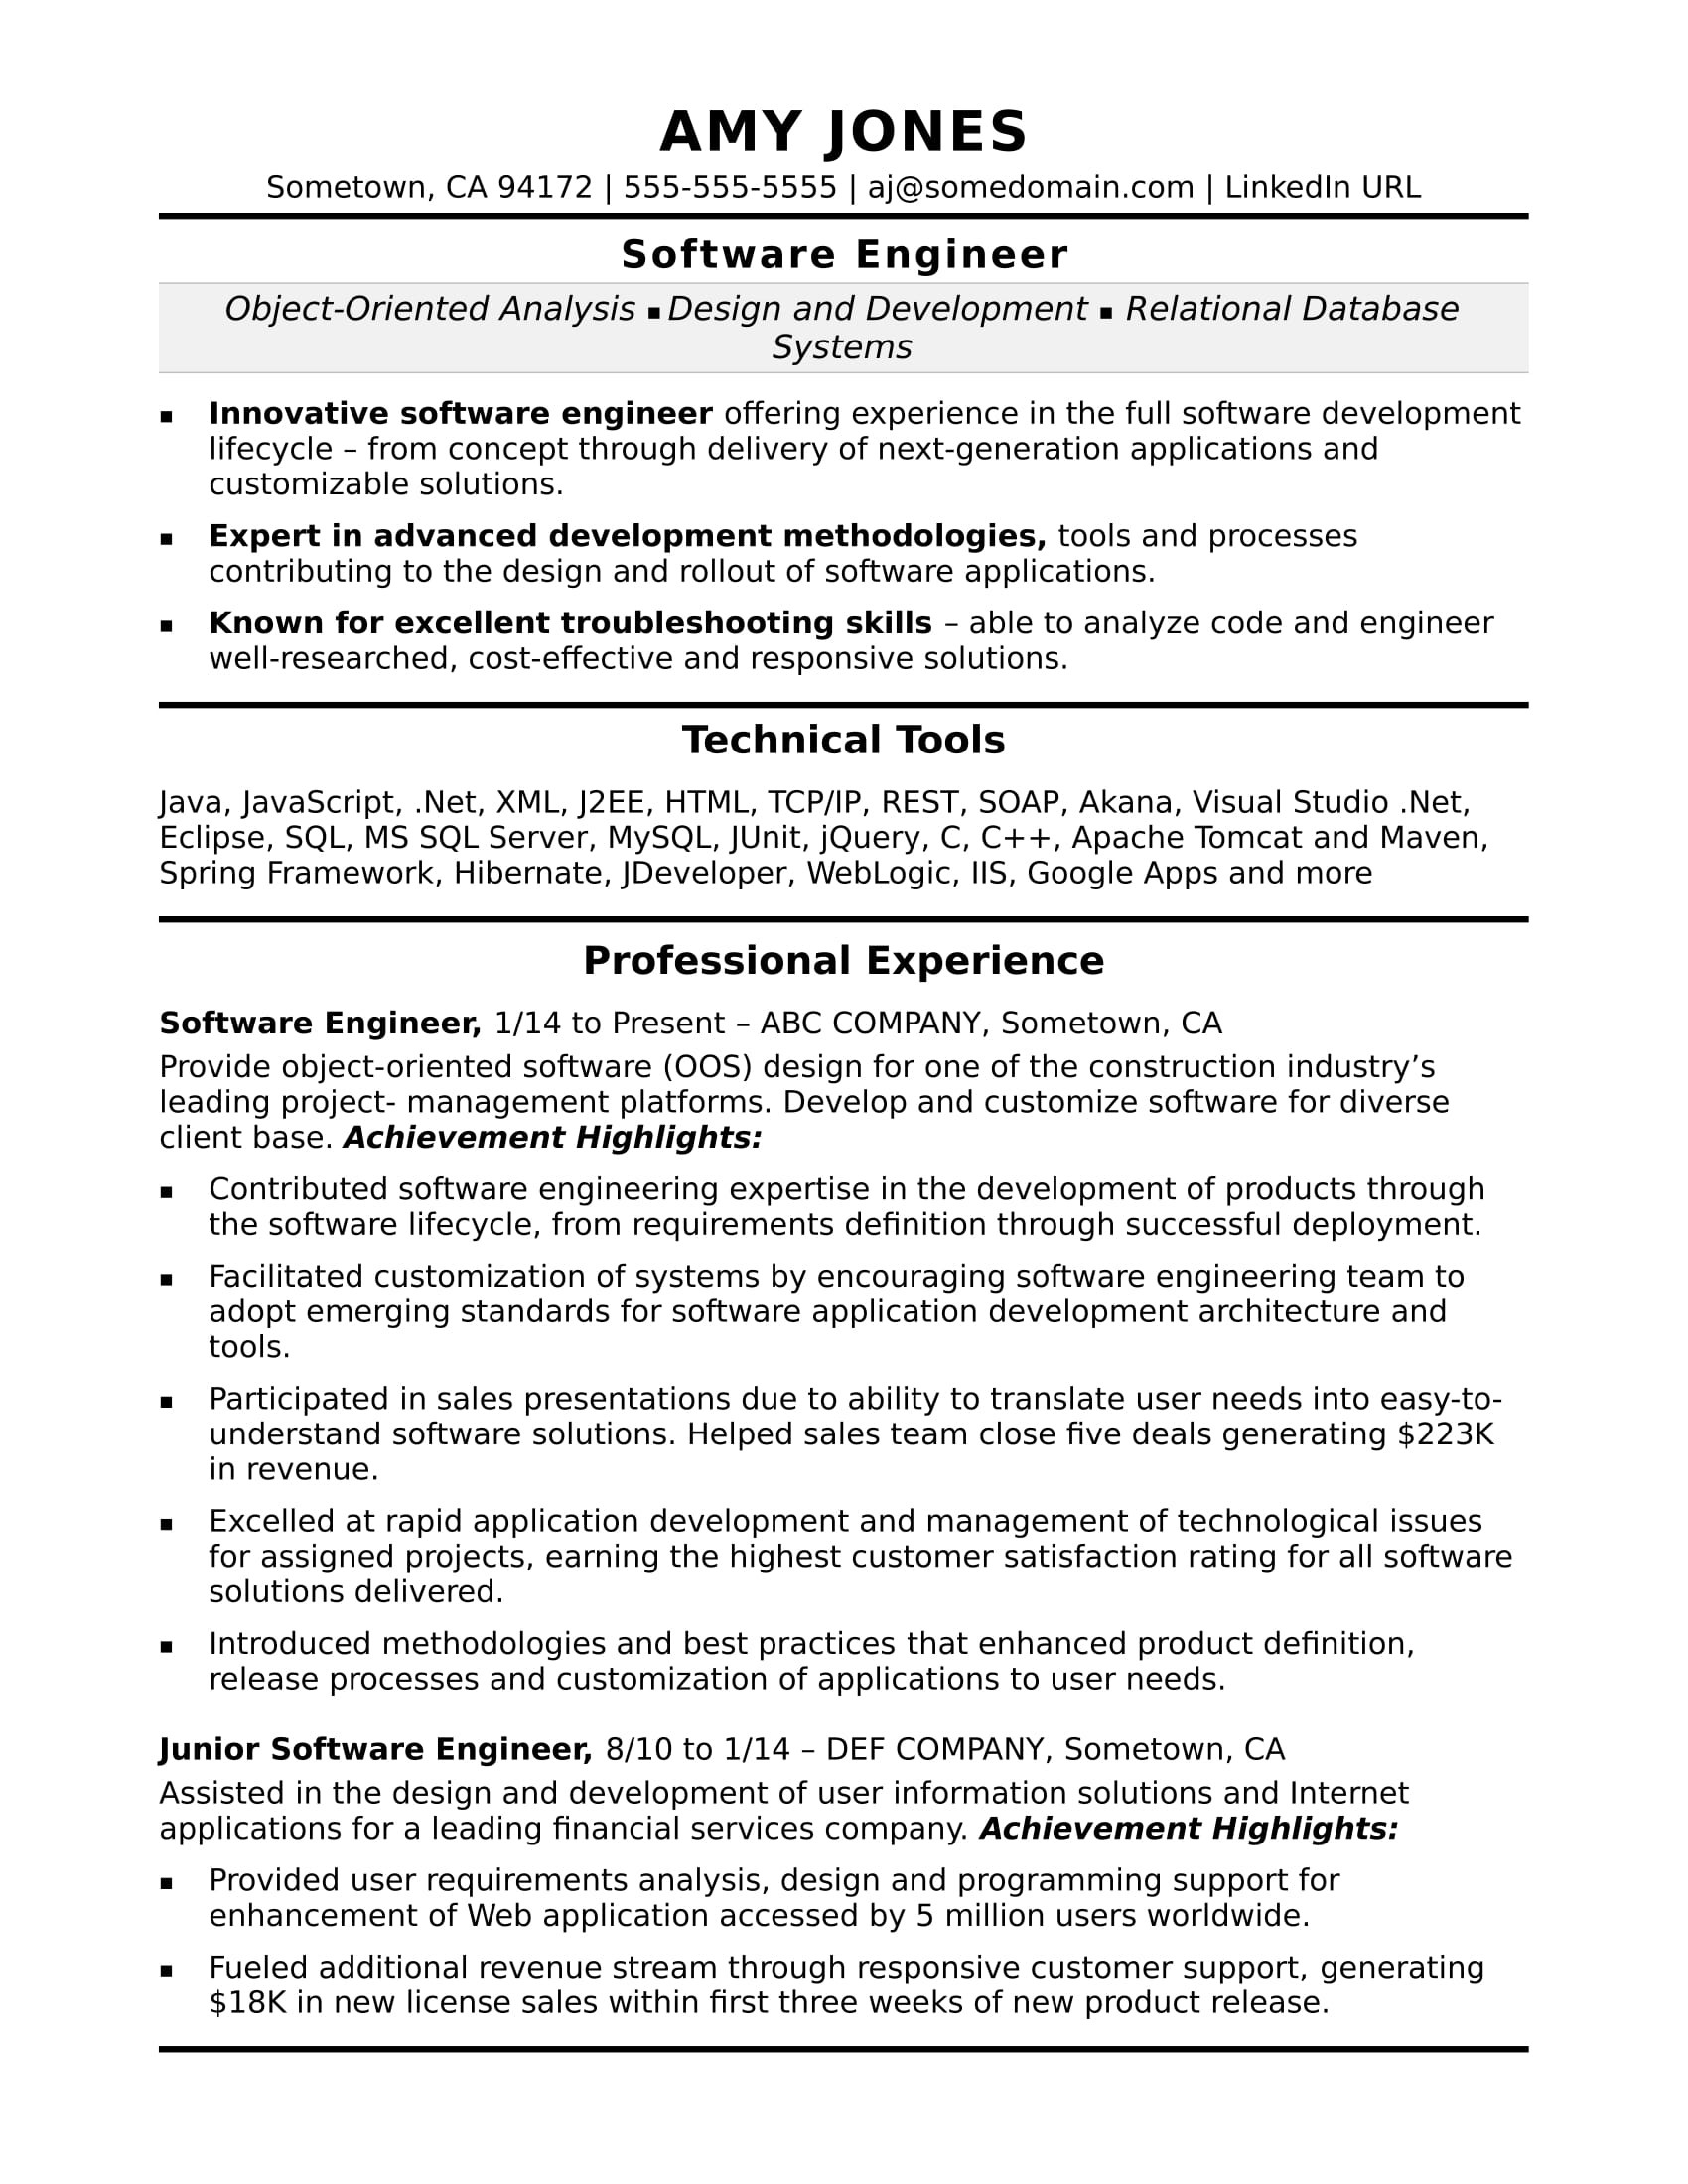 Sample Resume Templates for software Engineer Midlevel software Engineer Resume Sample Monster.com